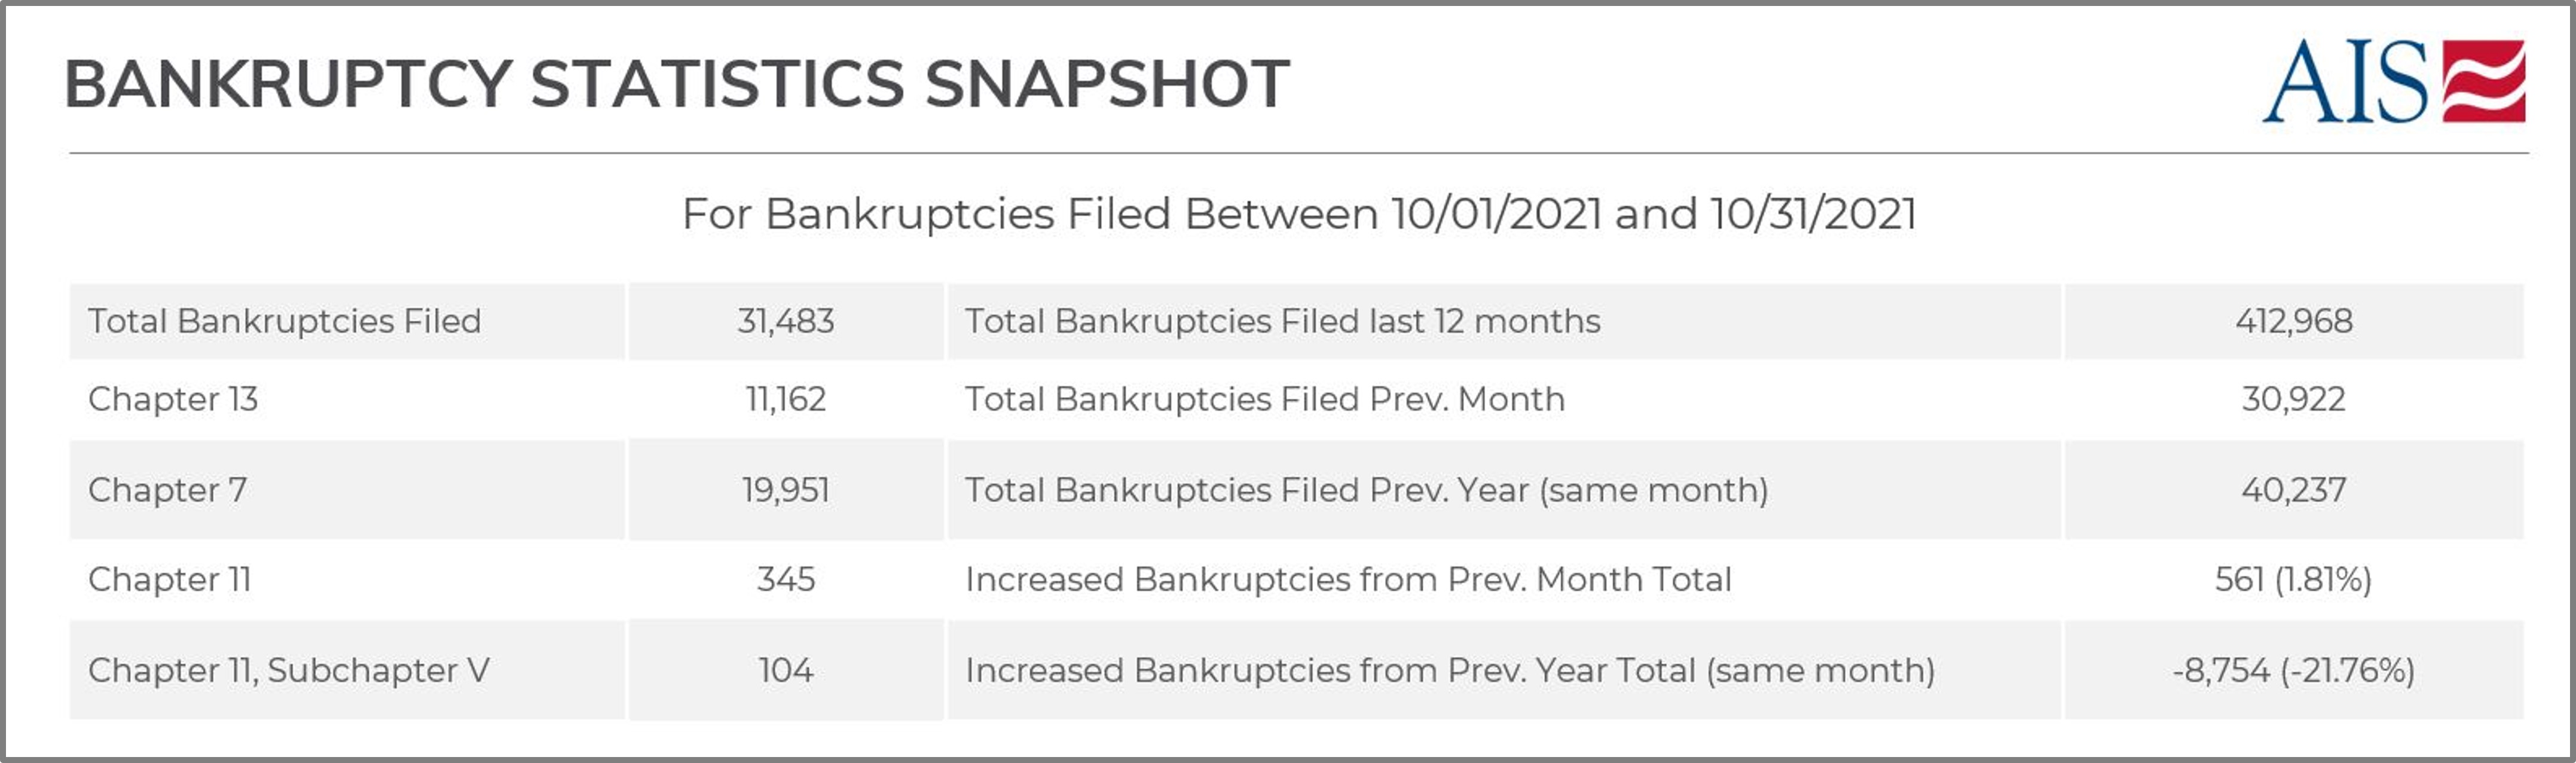 AIS Insight_October 2021_BANKRUPTCY STATISTICS SNAPSHOT (TABLE)-1